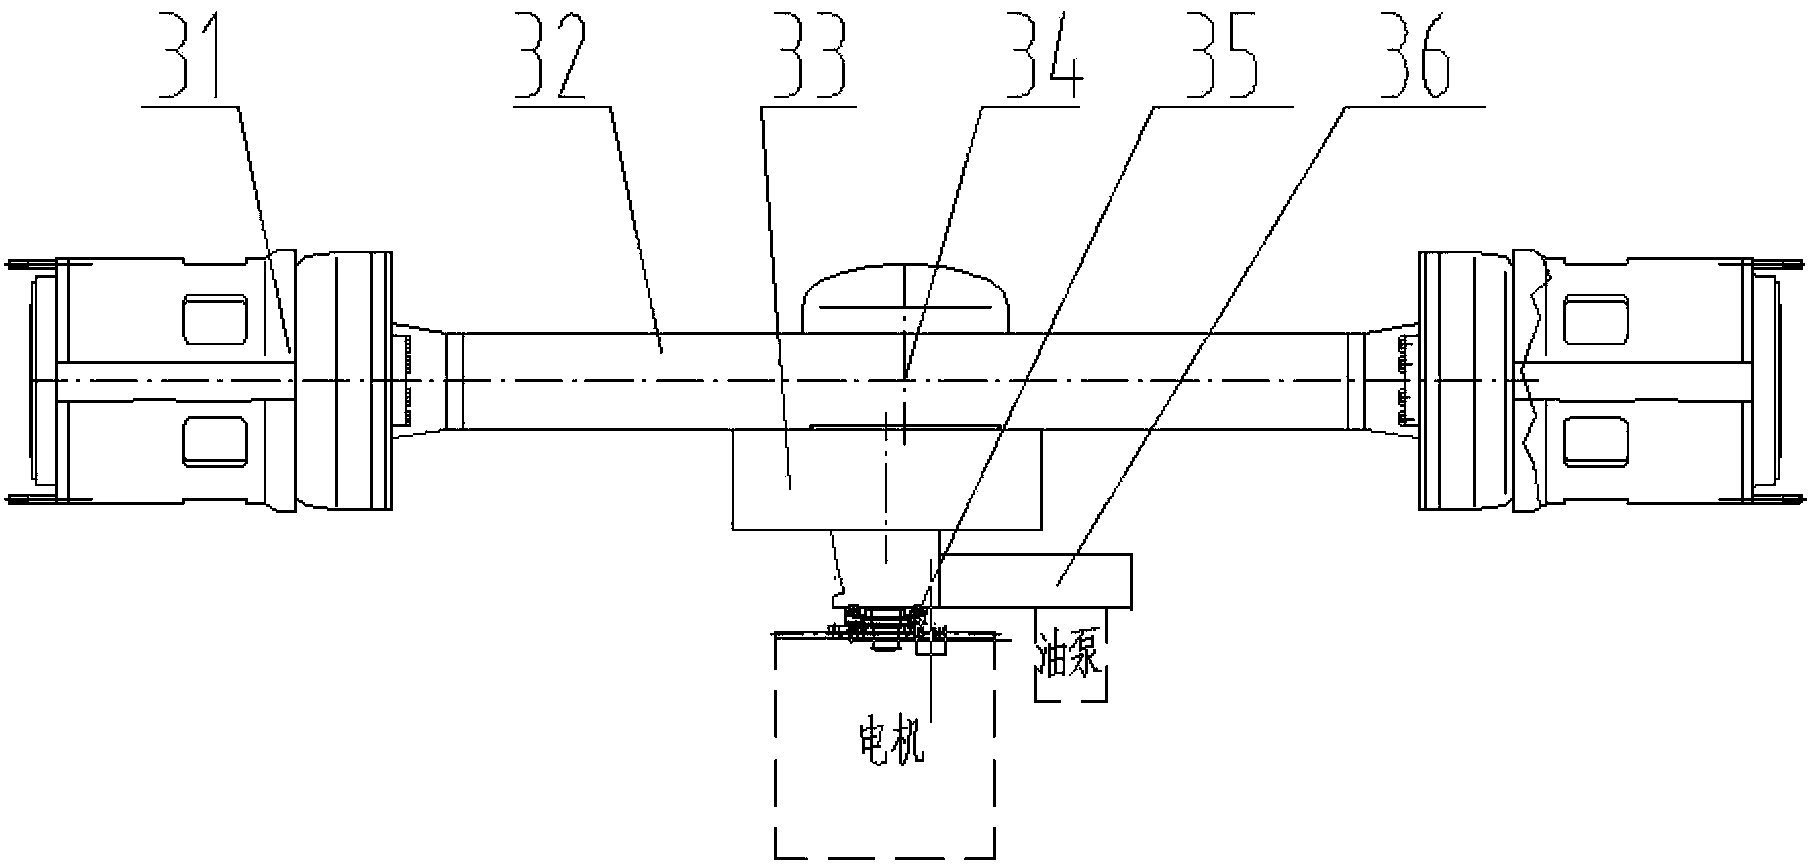 Full-electric controlled container lifting machine with centralized drive axle